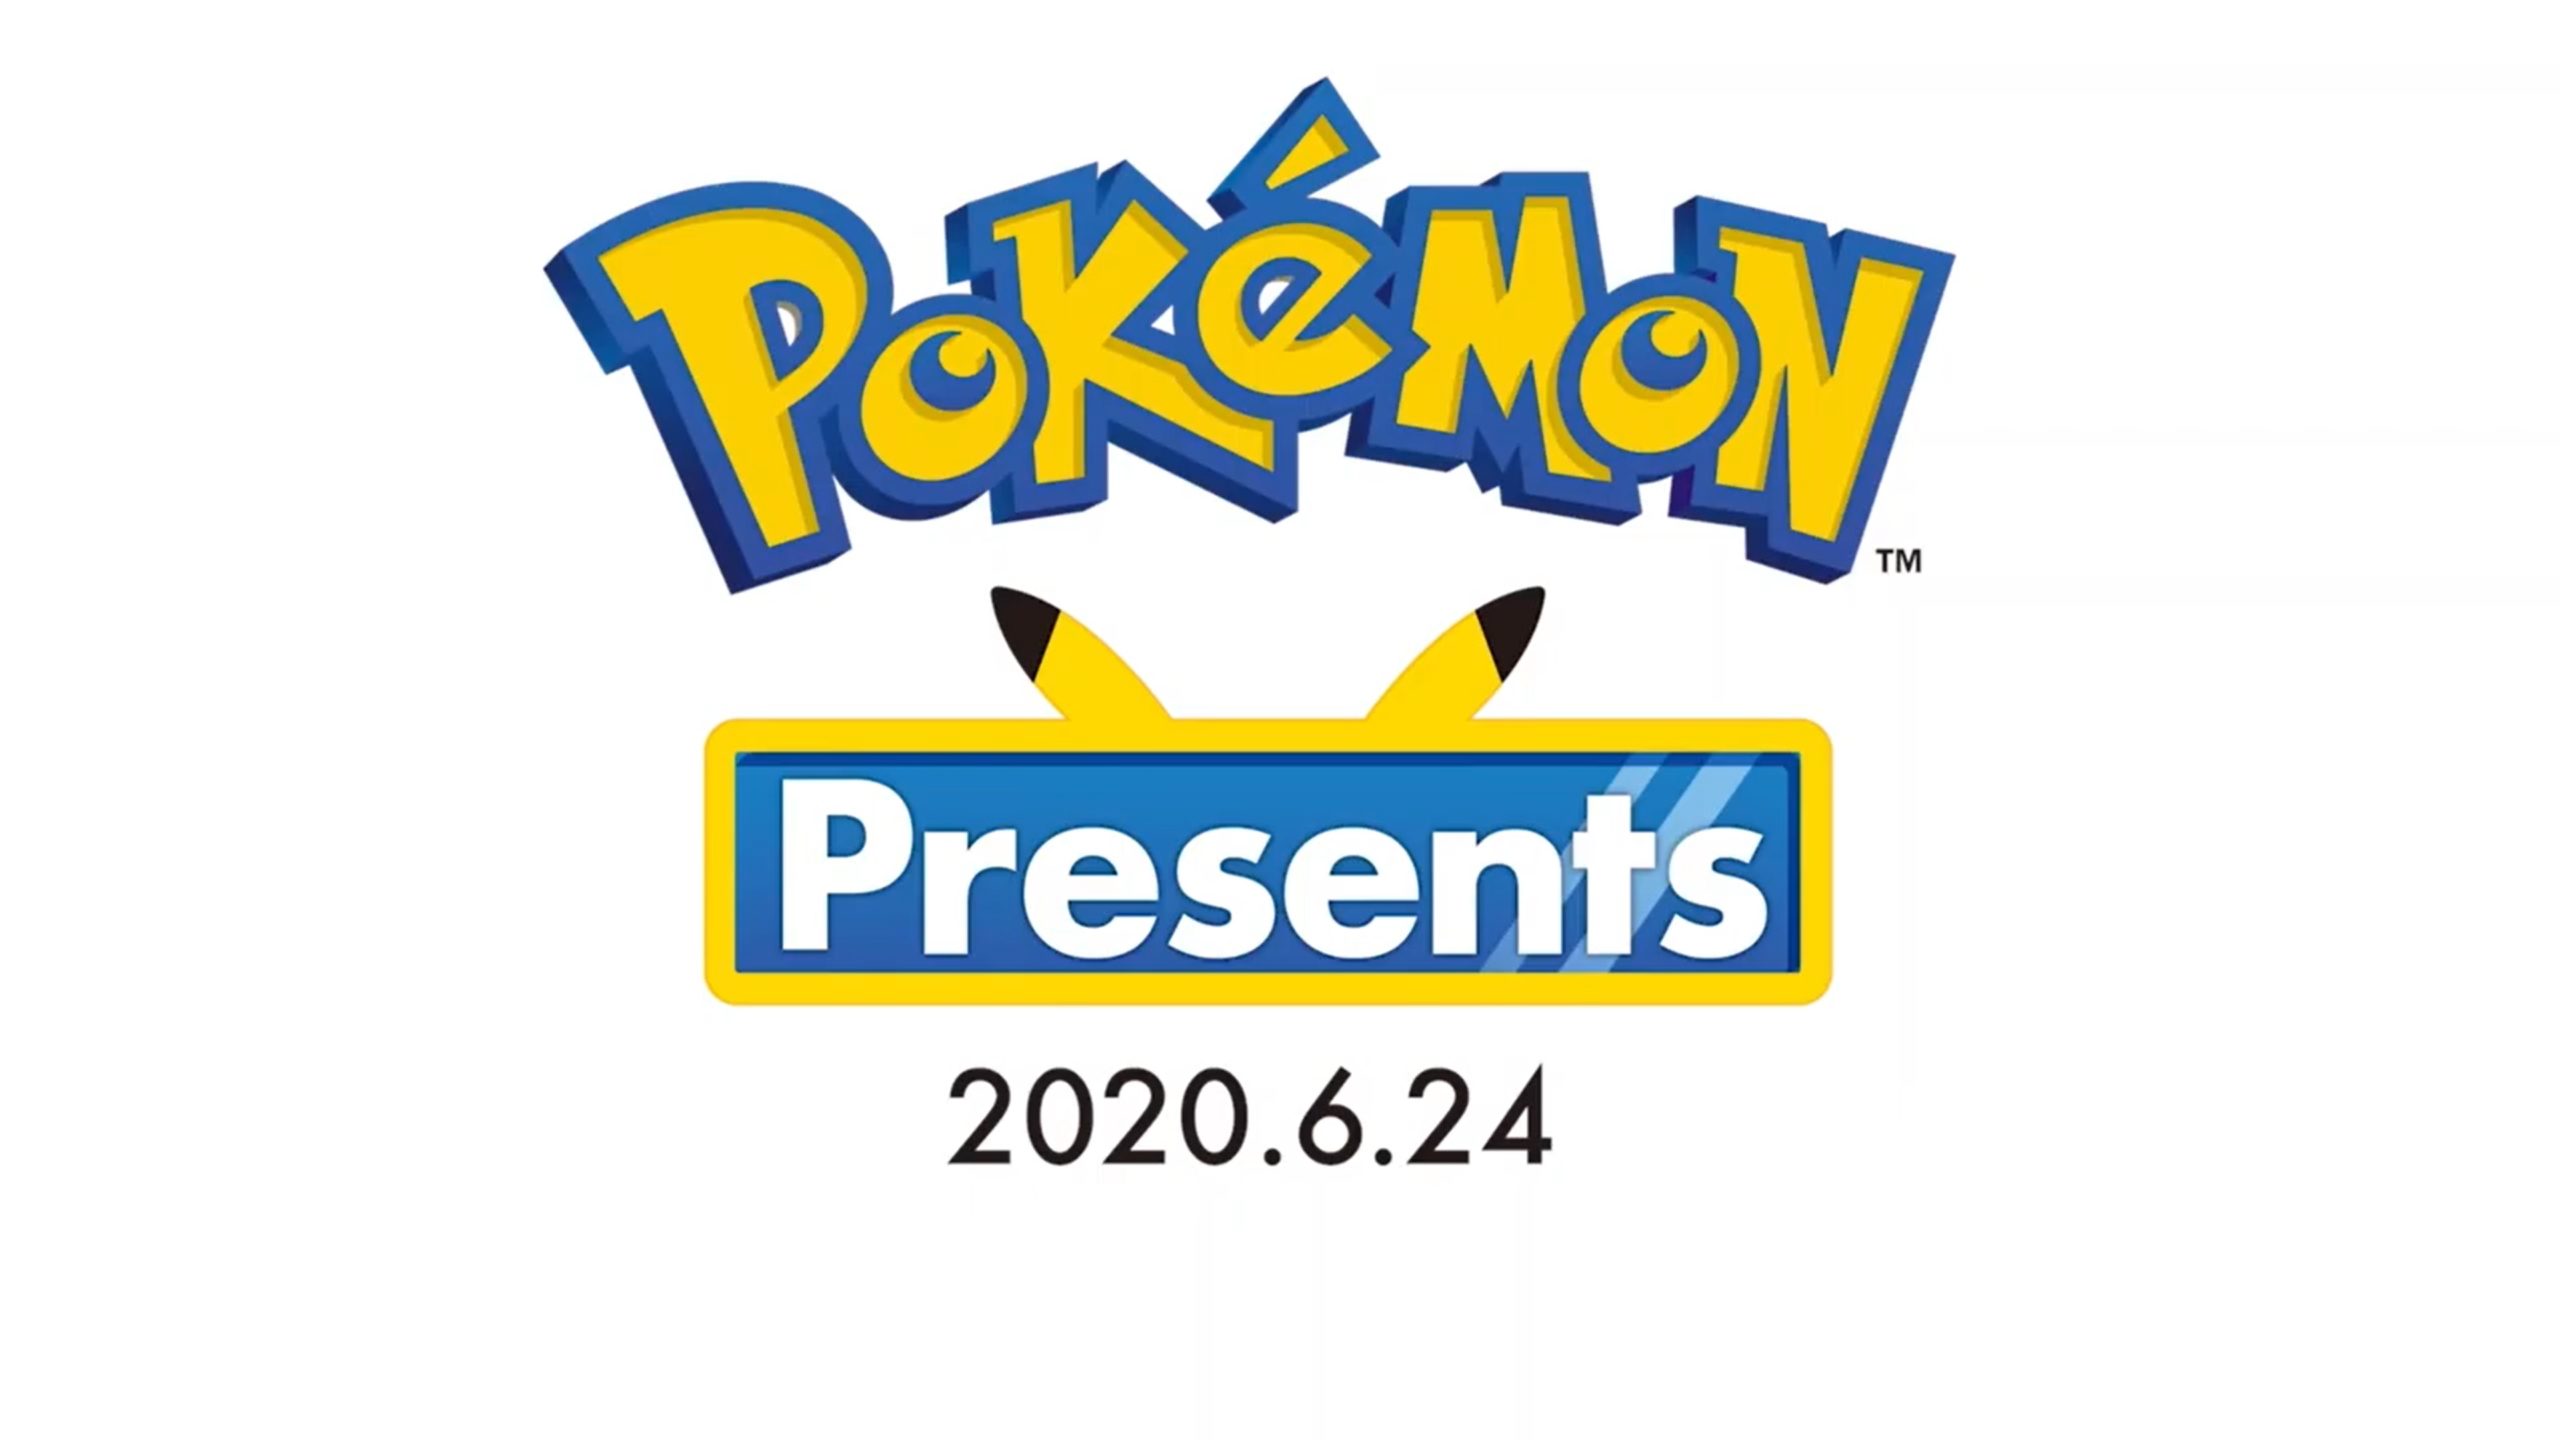 Pokemon Presents announced for June 24, will have news about a big project